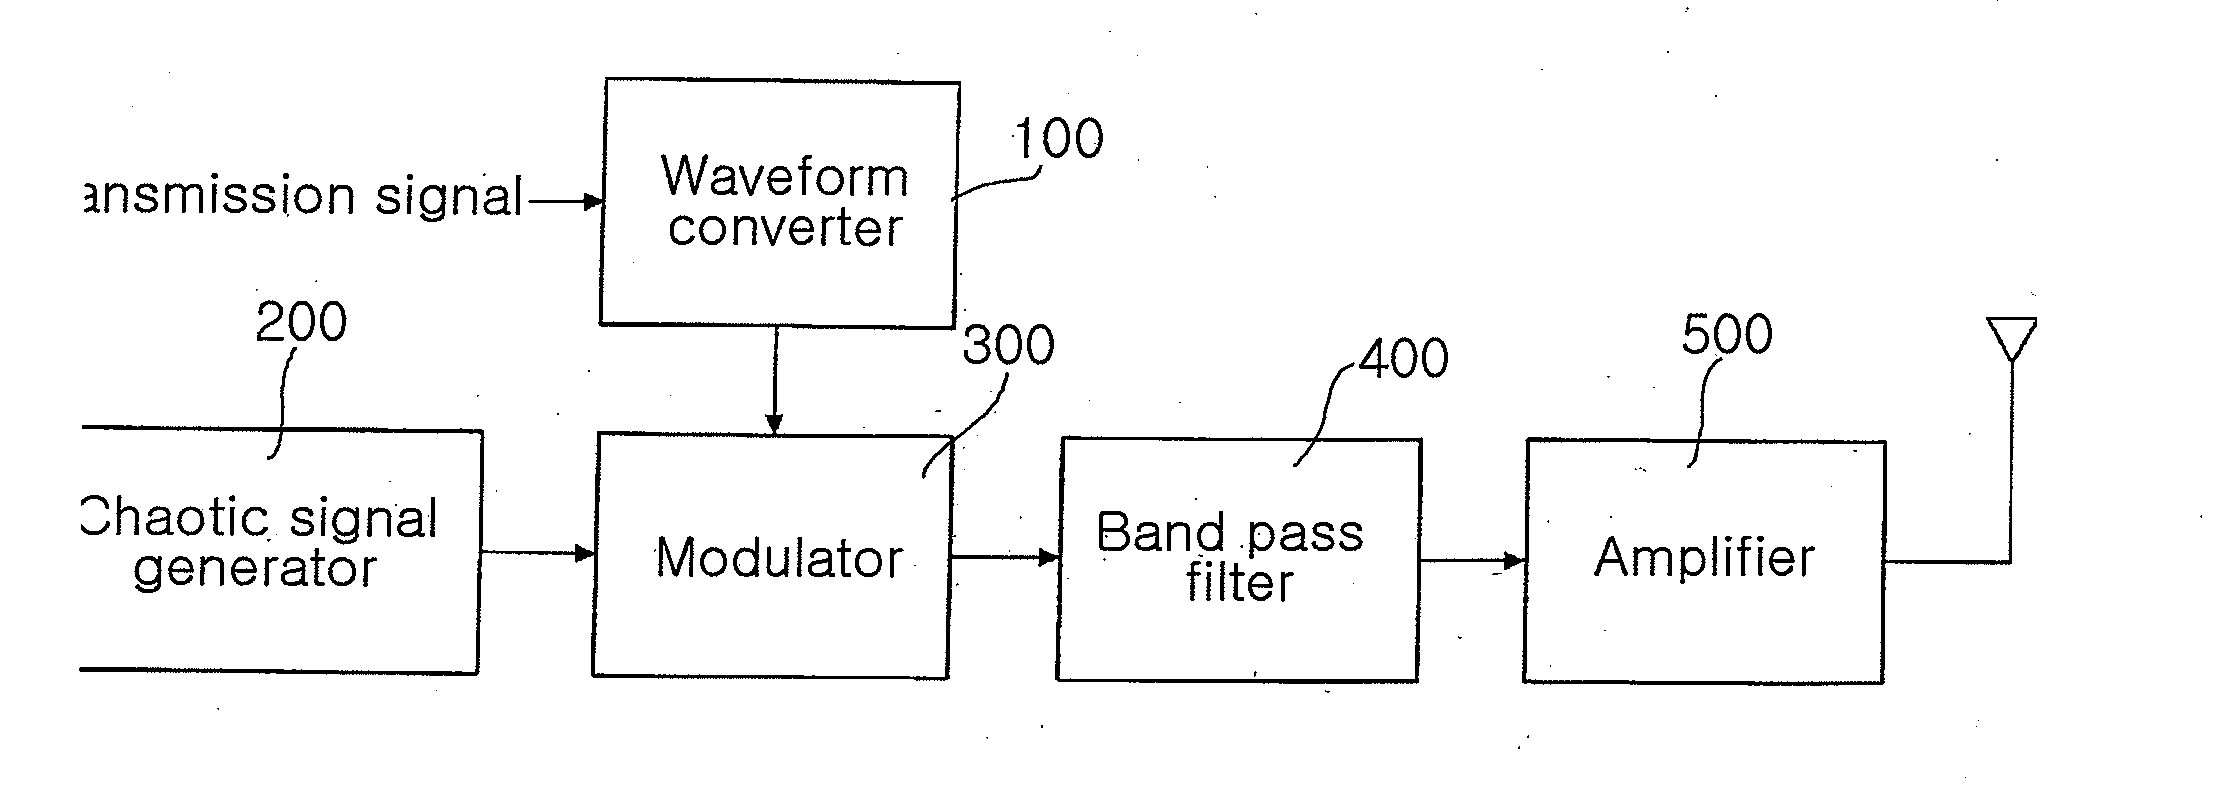 Chaotic signal transmitter using pulse shaping method